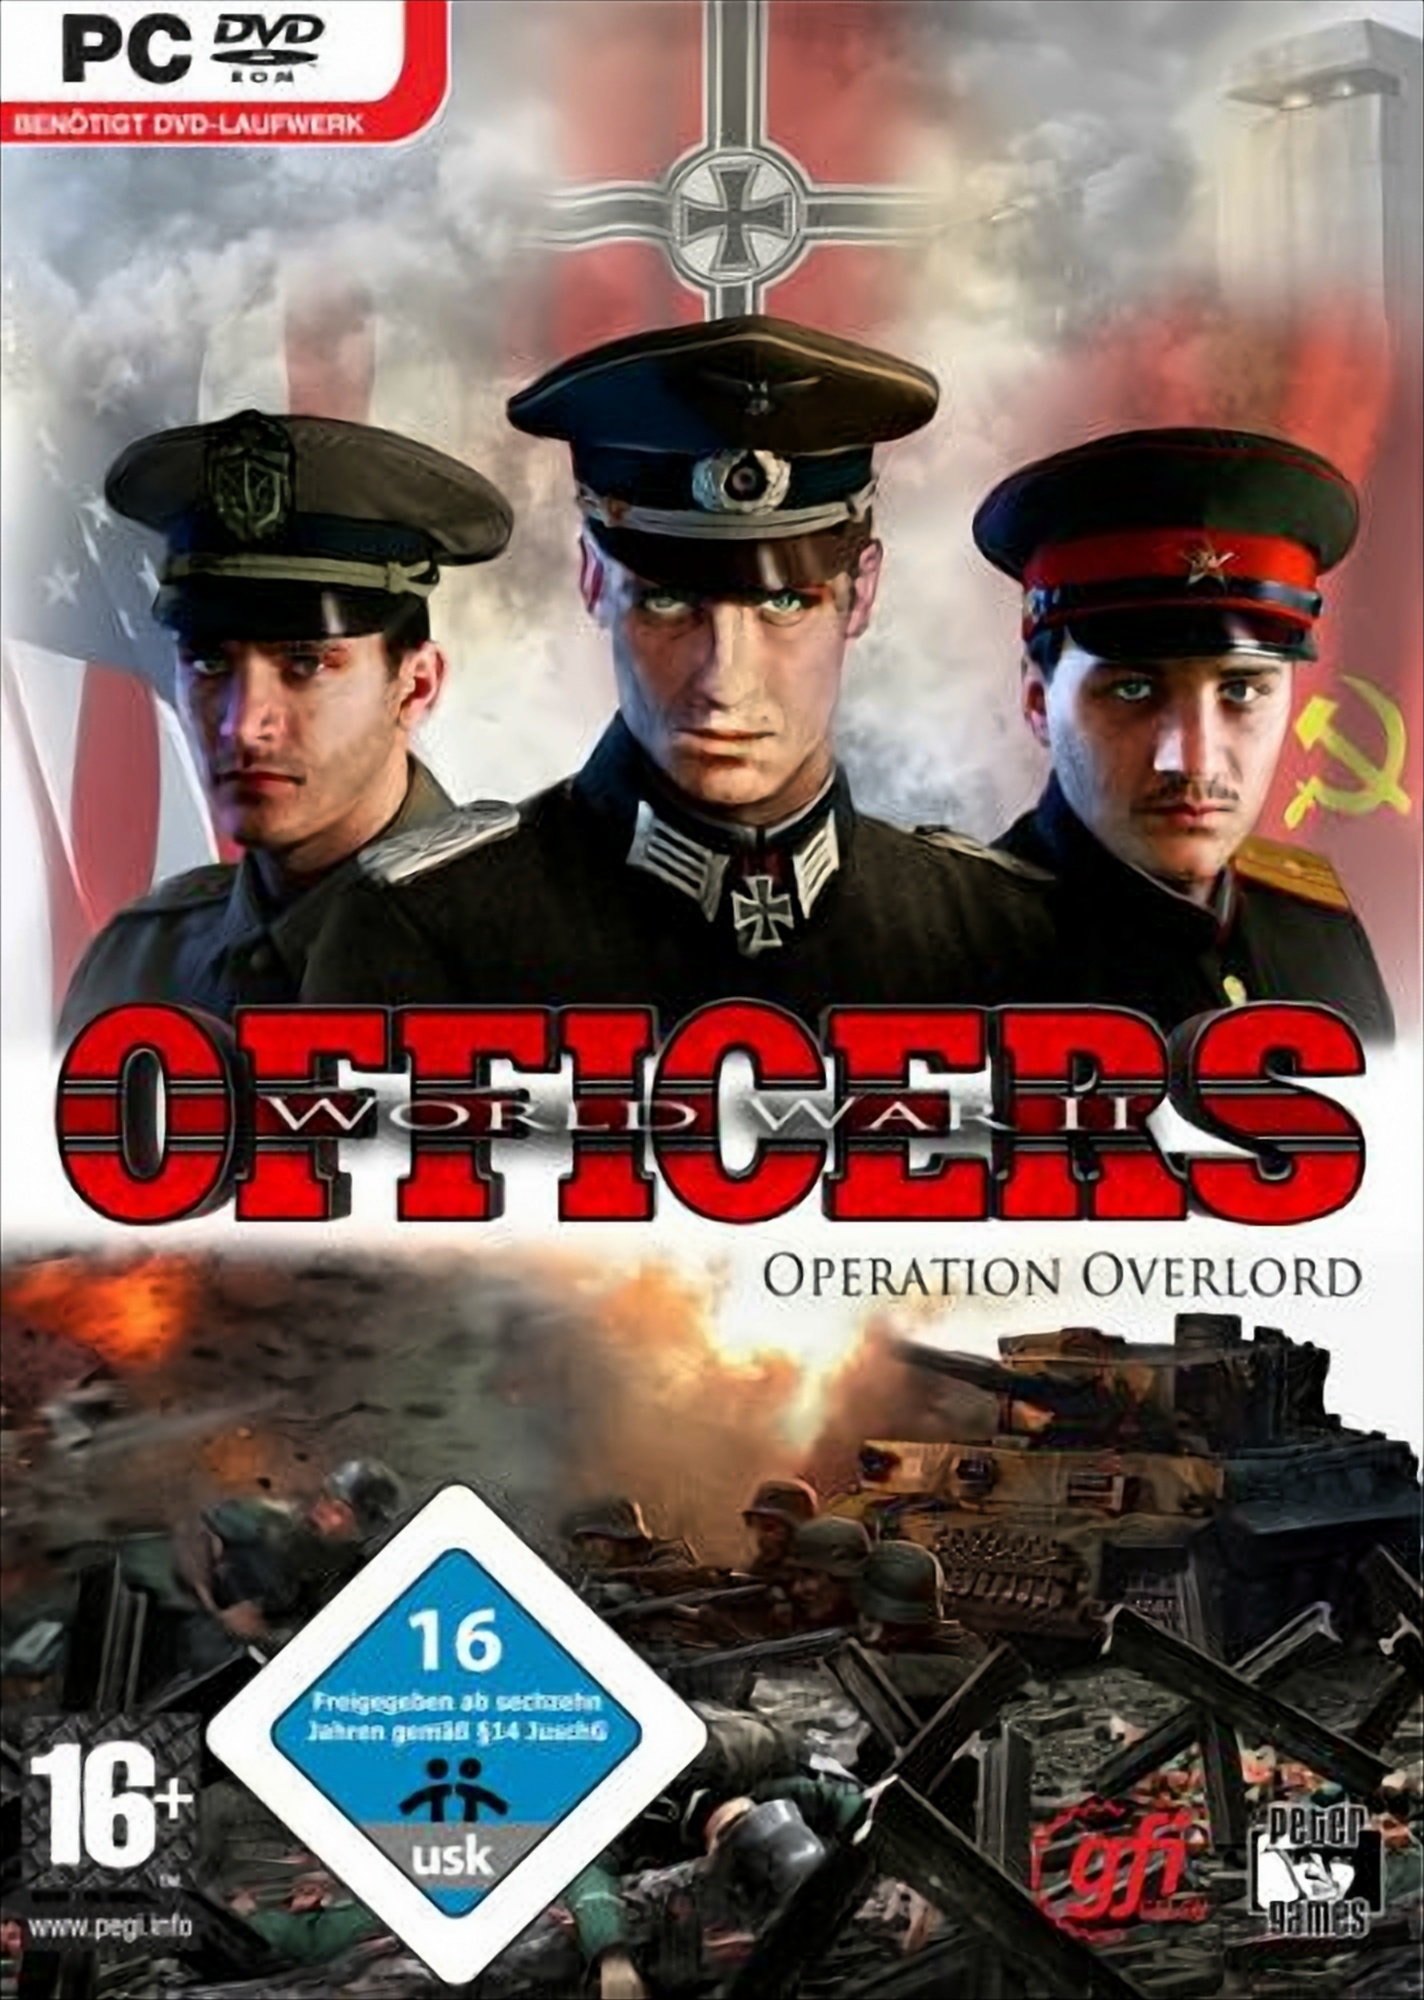 Officers - - [PC] Operation Overlord